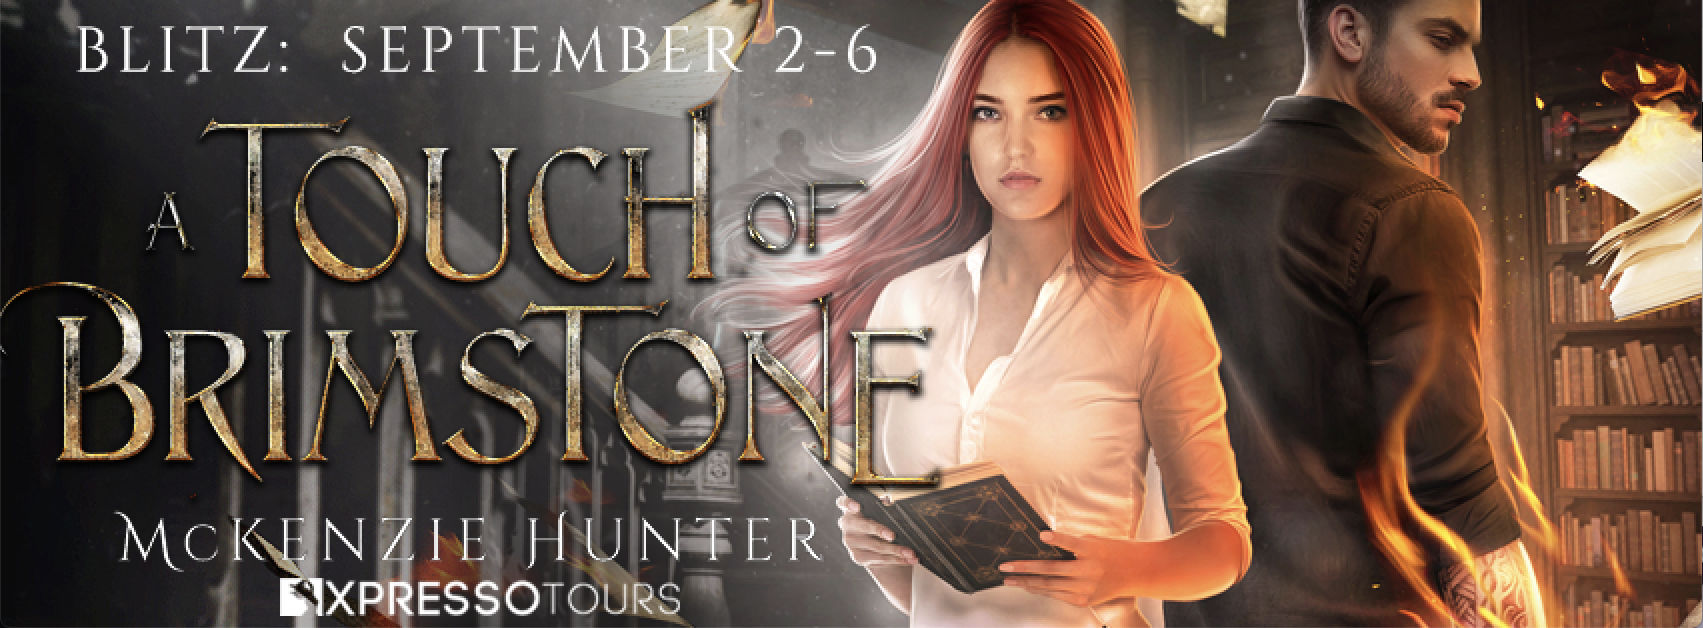 Book Blitz: A Touch of Brimstone by McKenzie Hunter + Giveaway (INT)